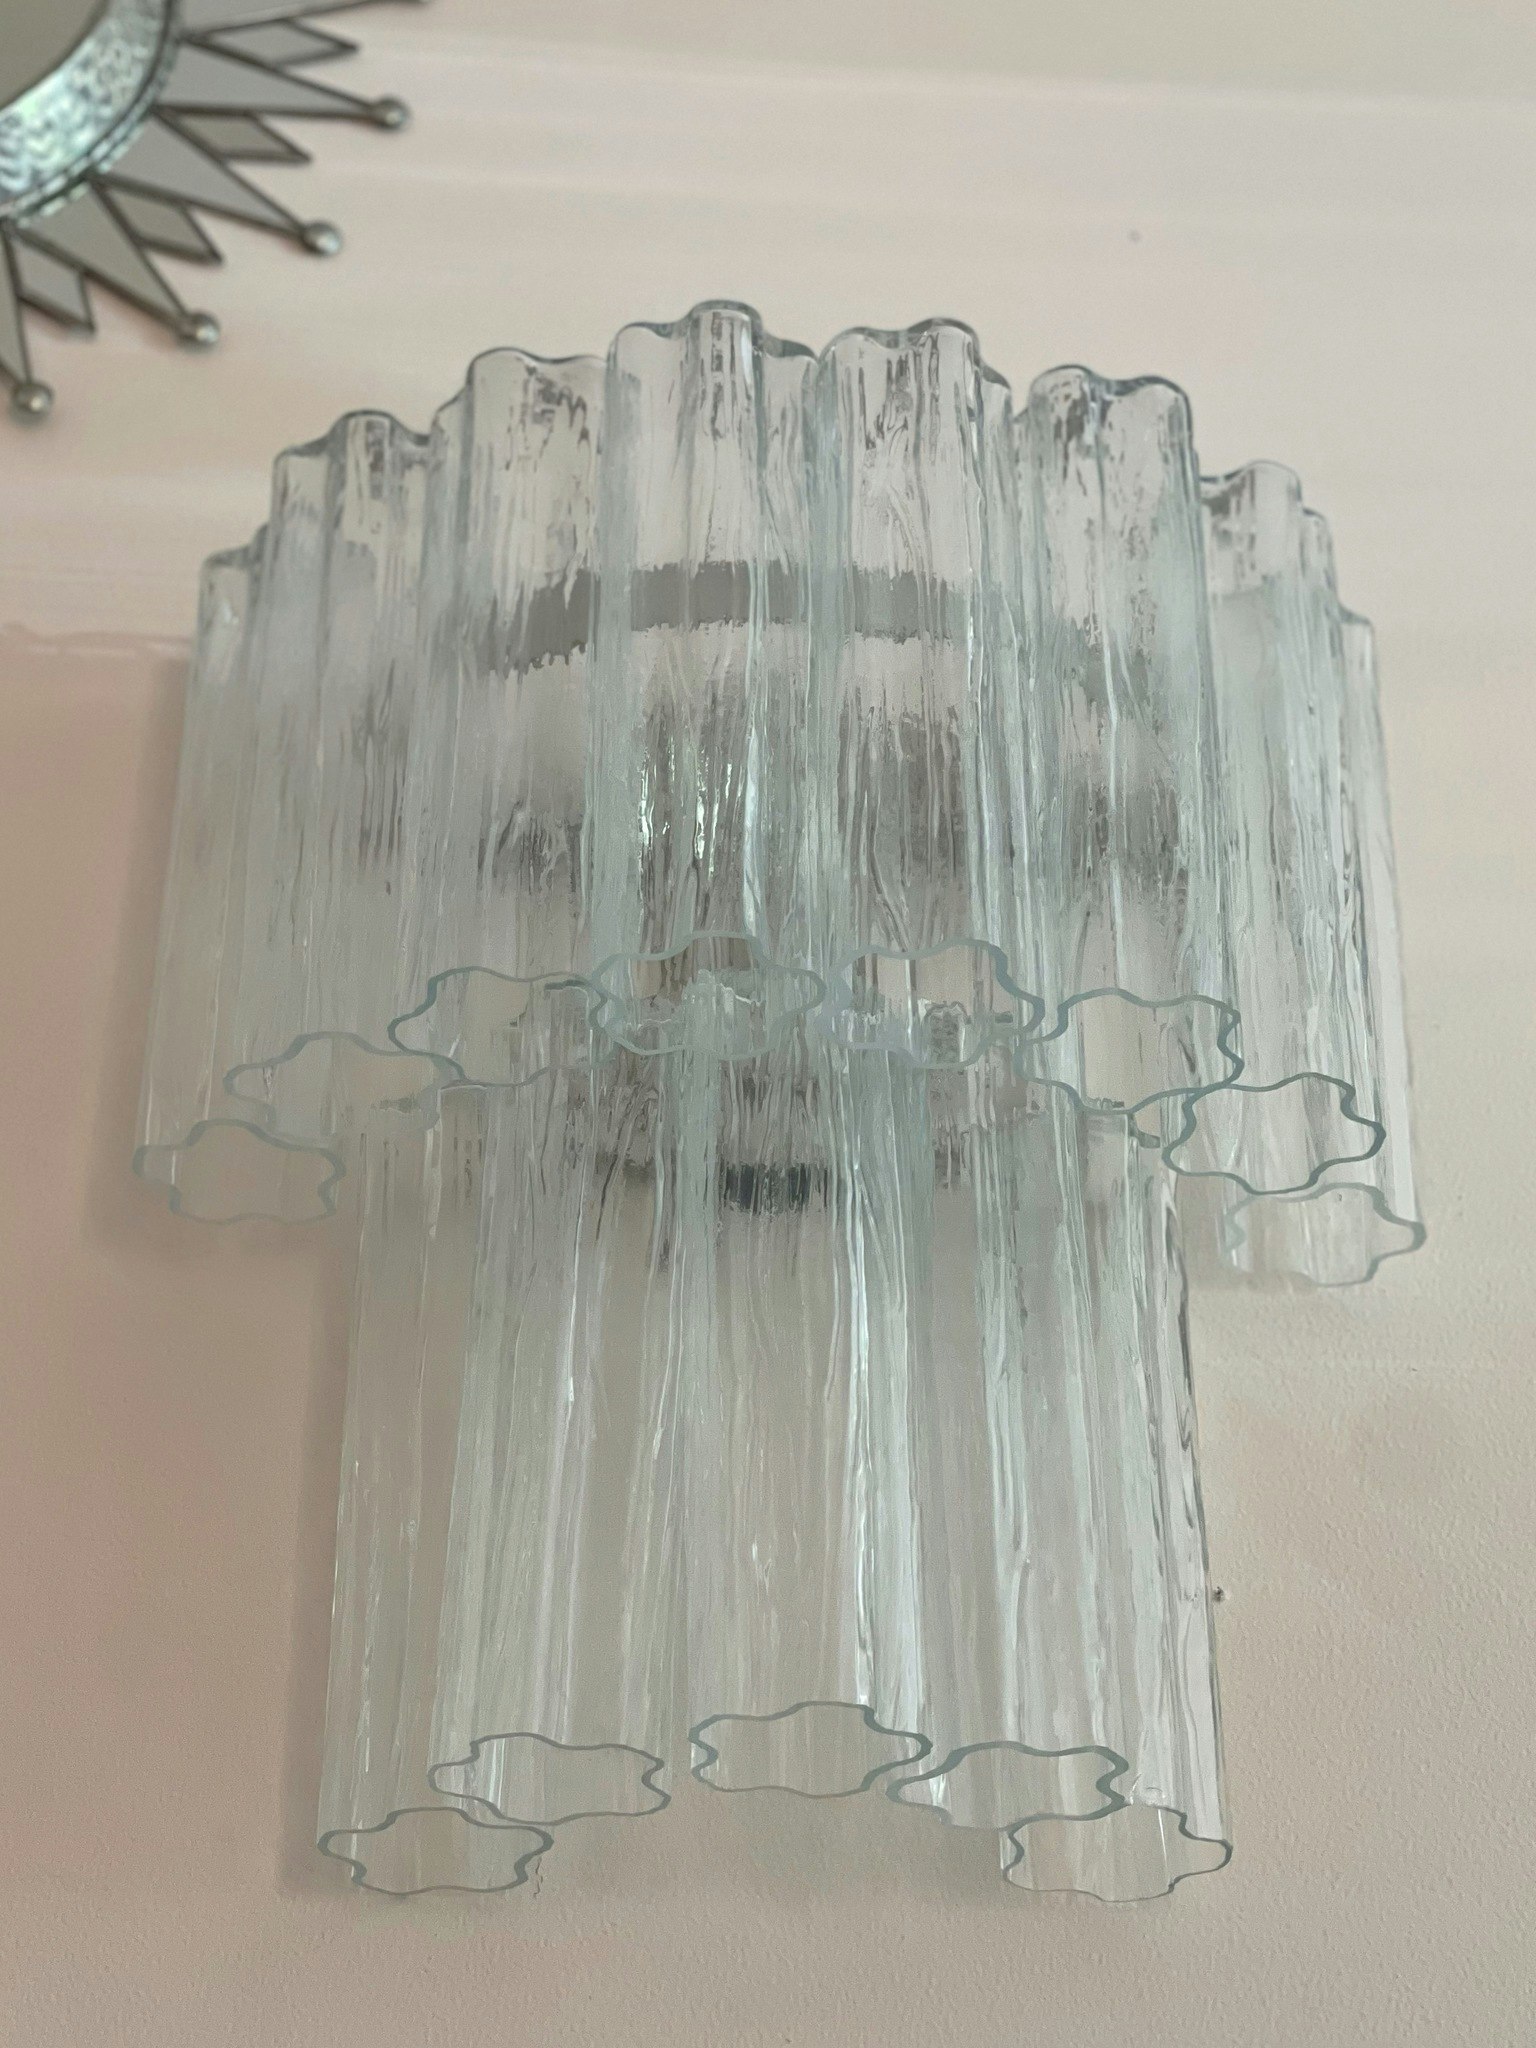 Murano Wall Lamp 'TUBULAR' small size in Clear glass.